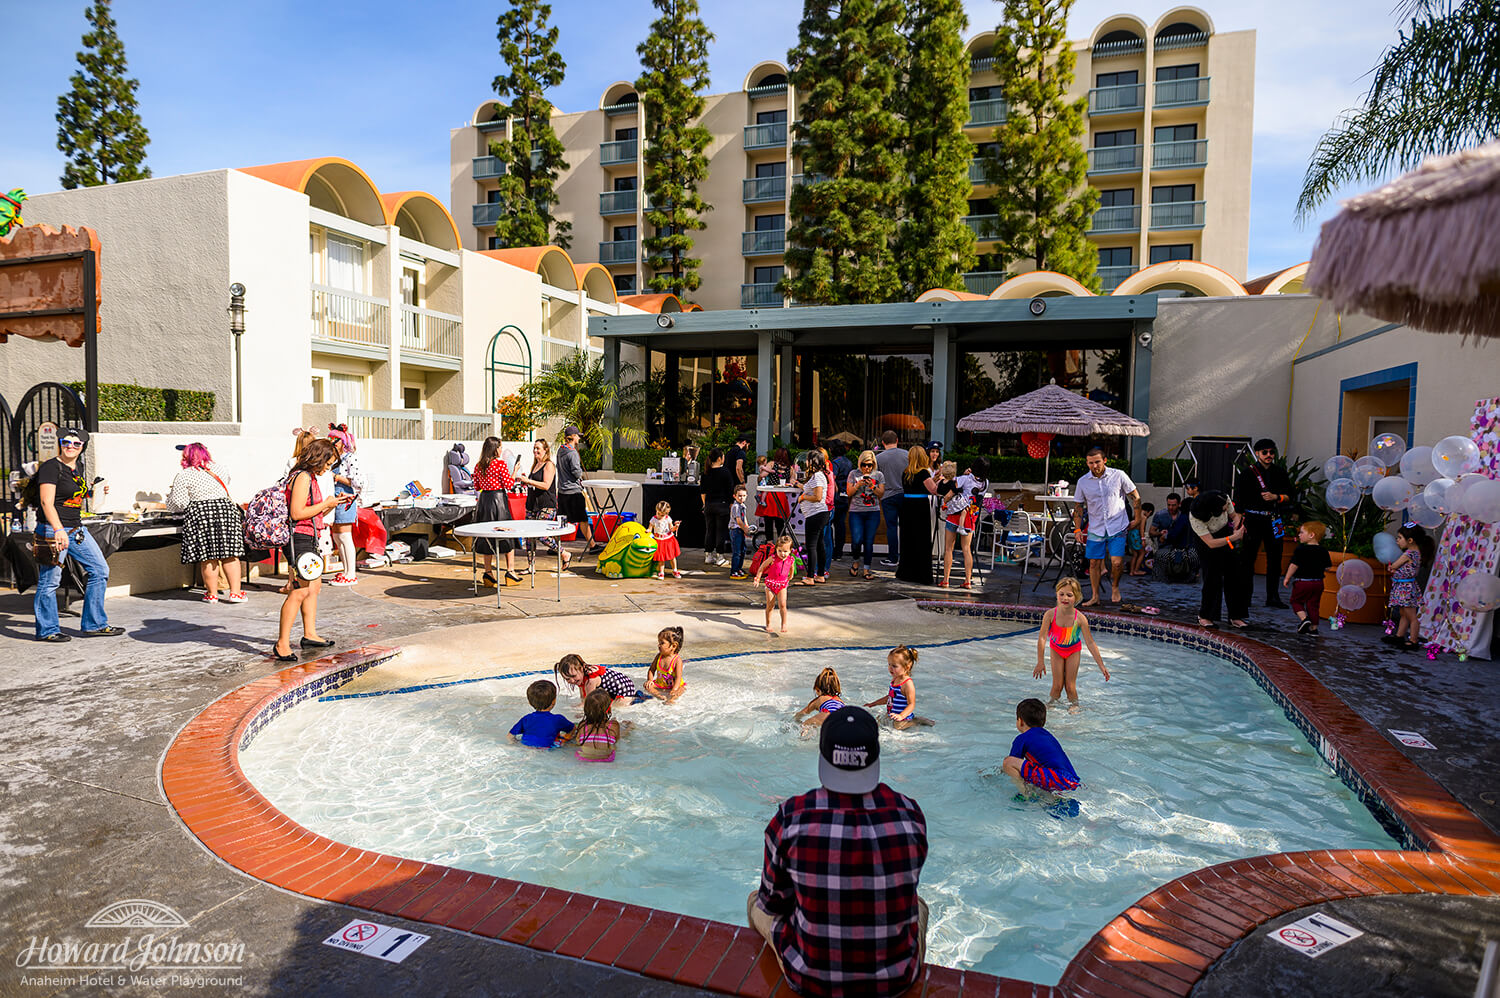 Children and parents gather around and play in the shallow pool at Howard Johnson Anaheim hotel